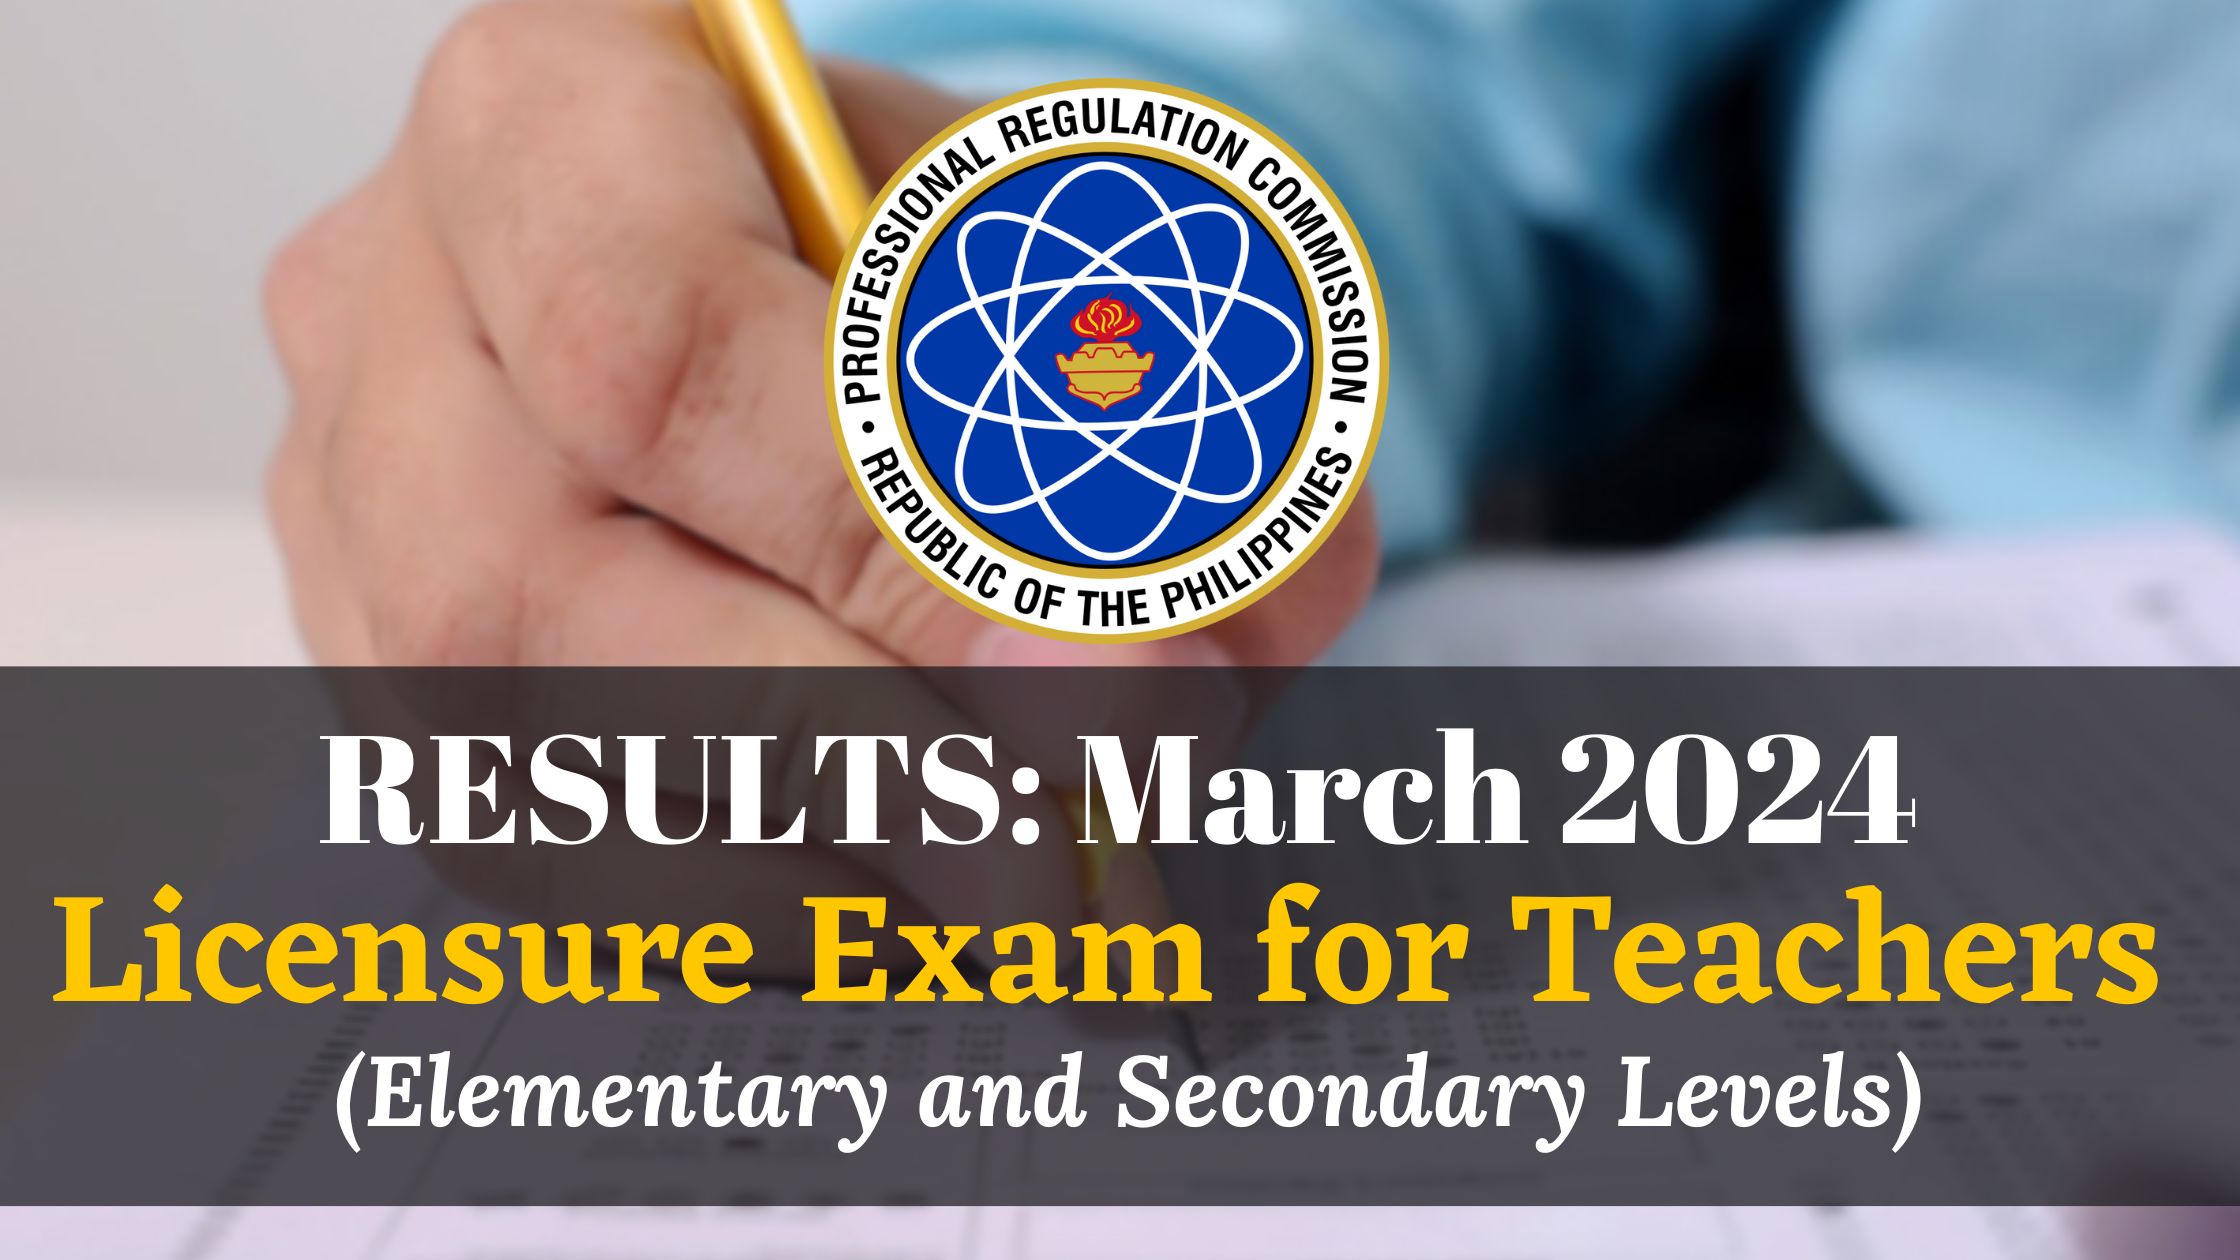 RESULTS MARCH 2024 LICENSURE EXAM FOR TEACHERS